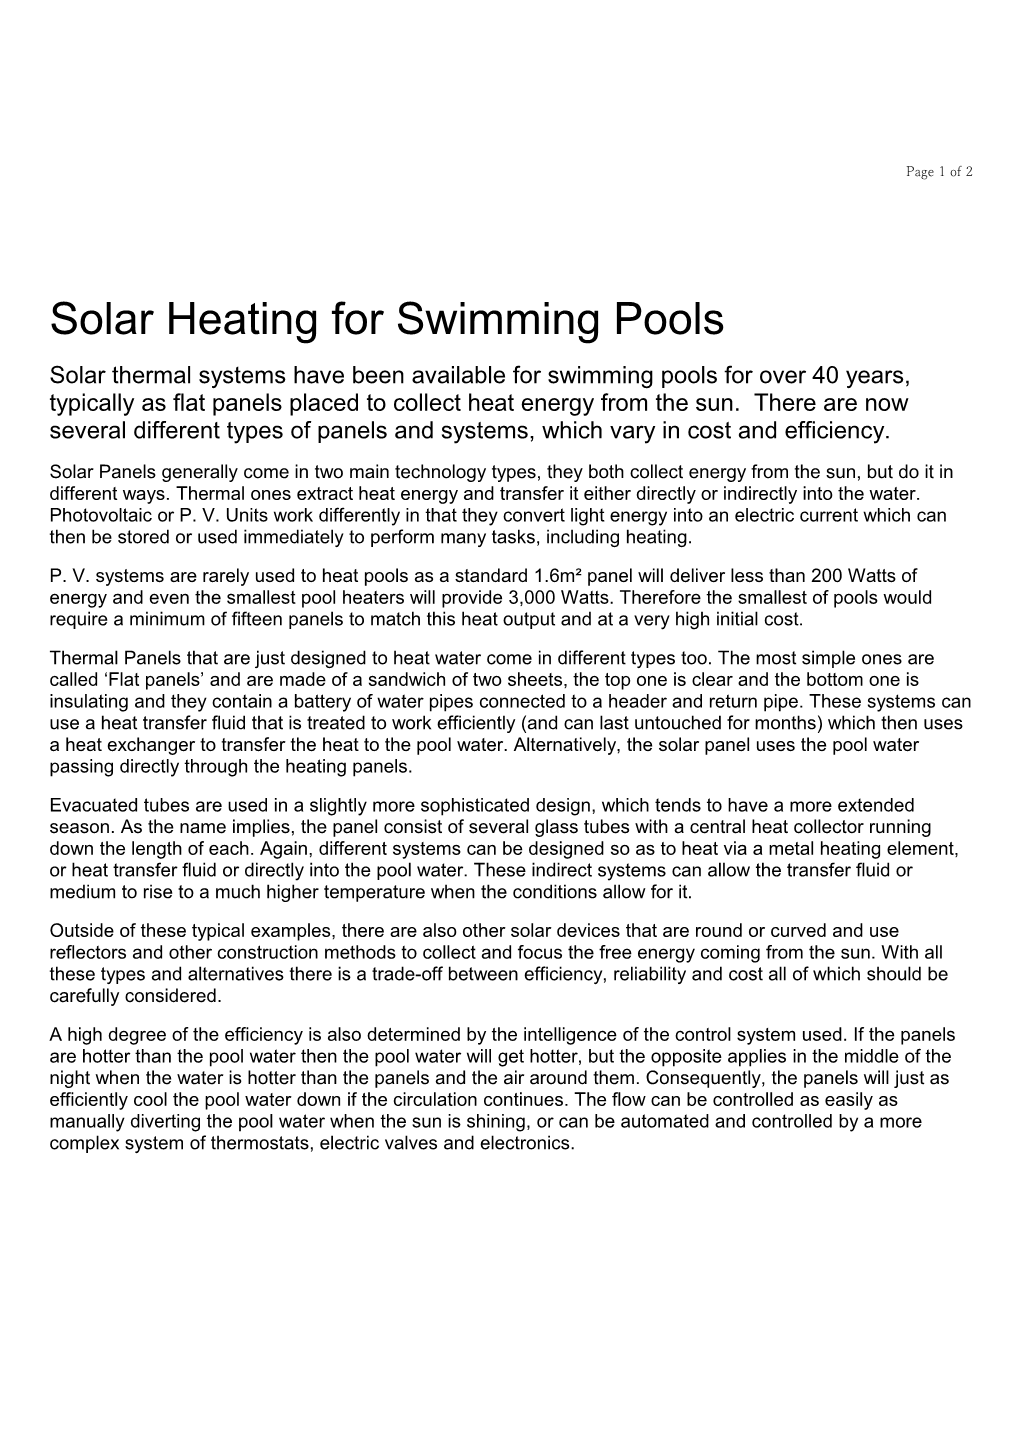 Solar Heating for Swimming Pools